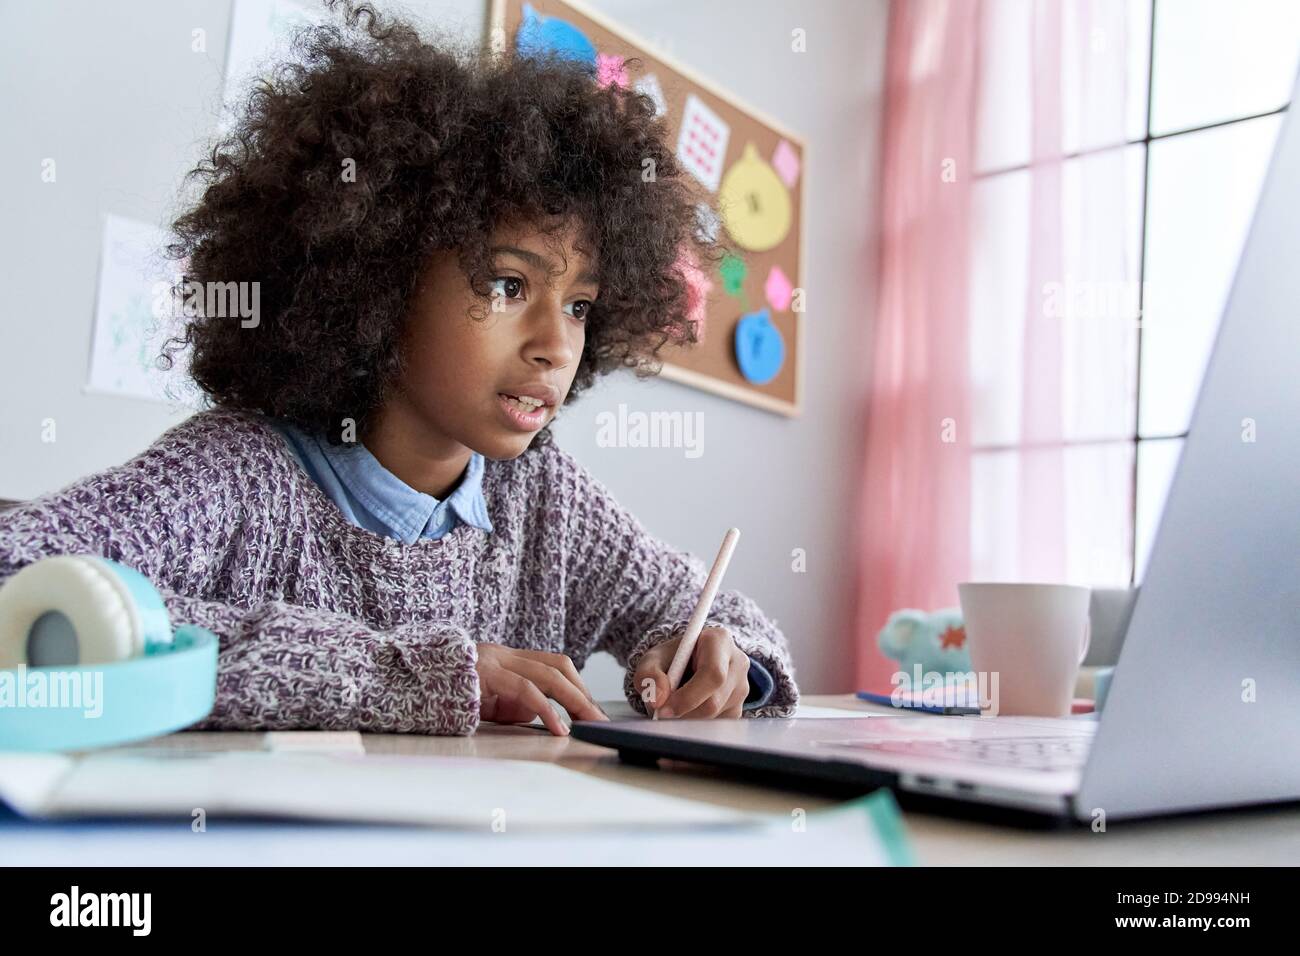 African school child girl virtual online learning watching class at home. Stock Photo